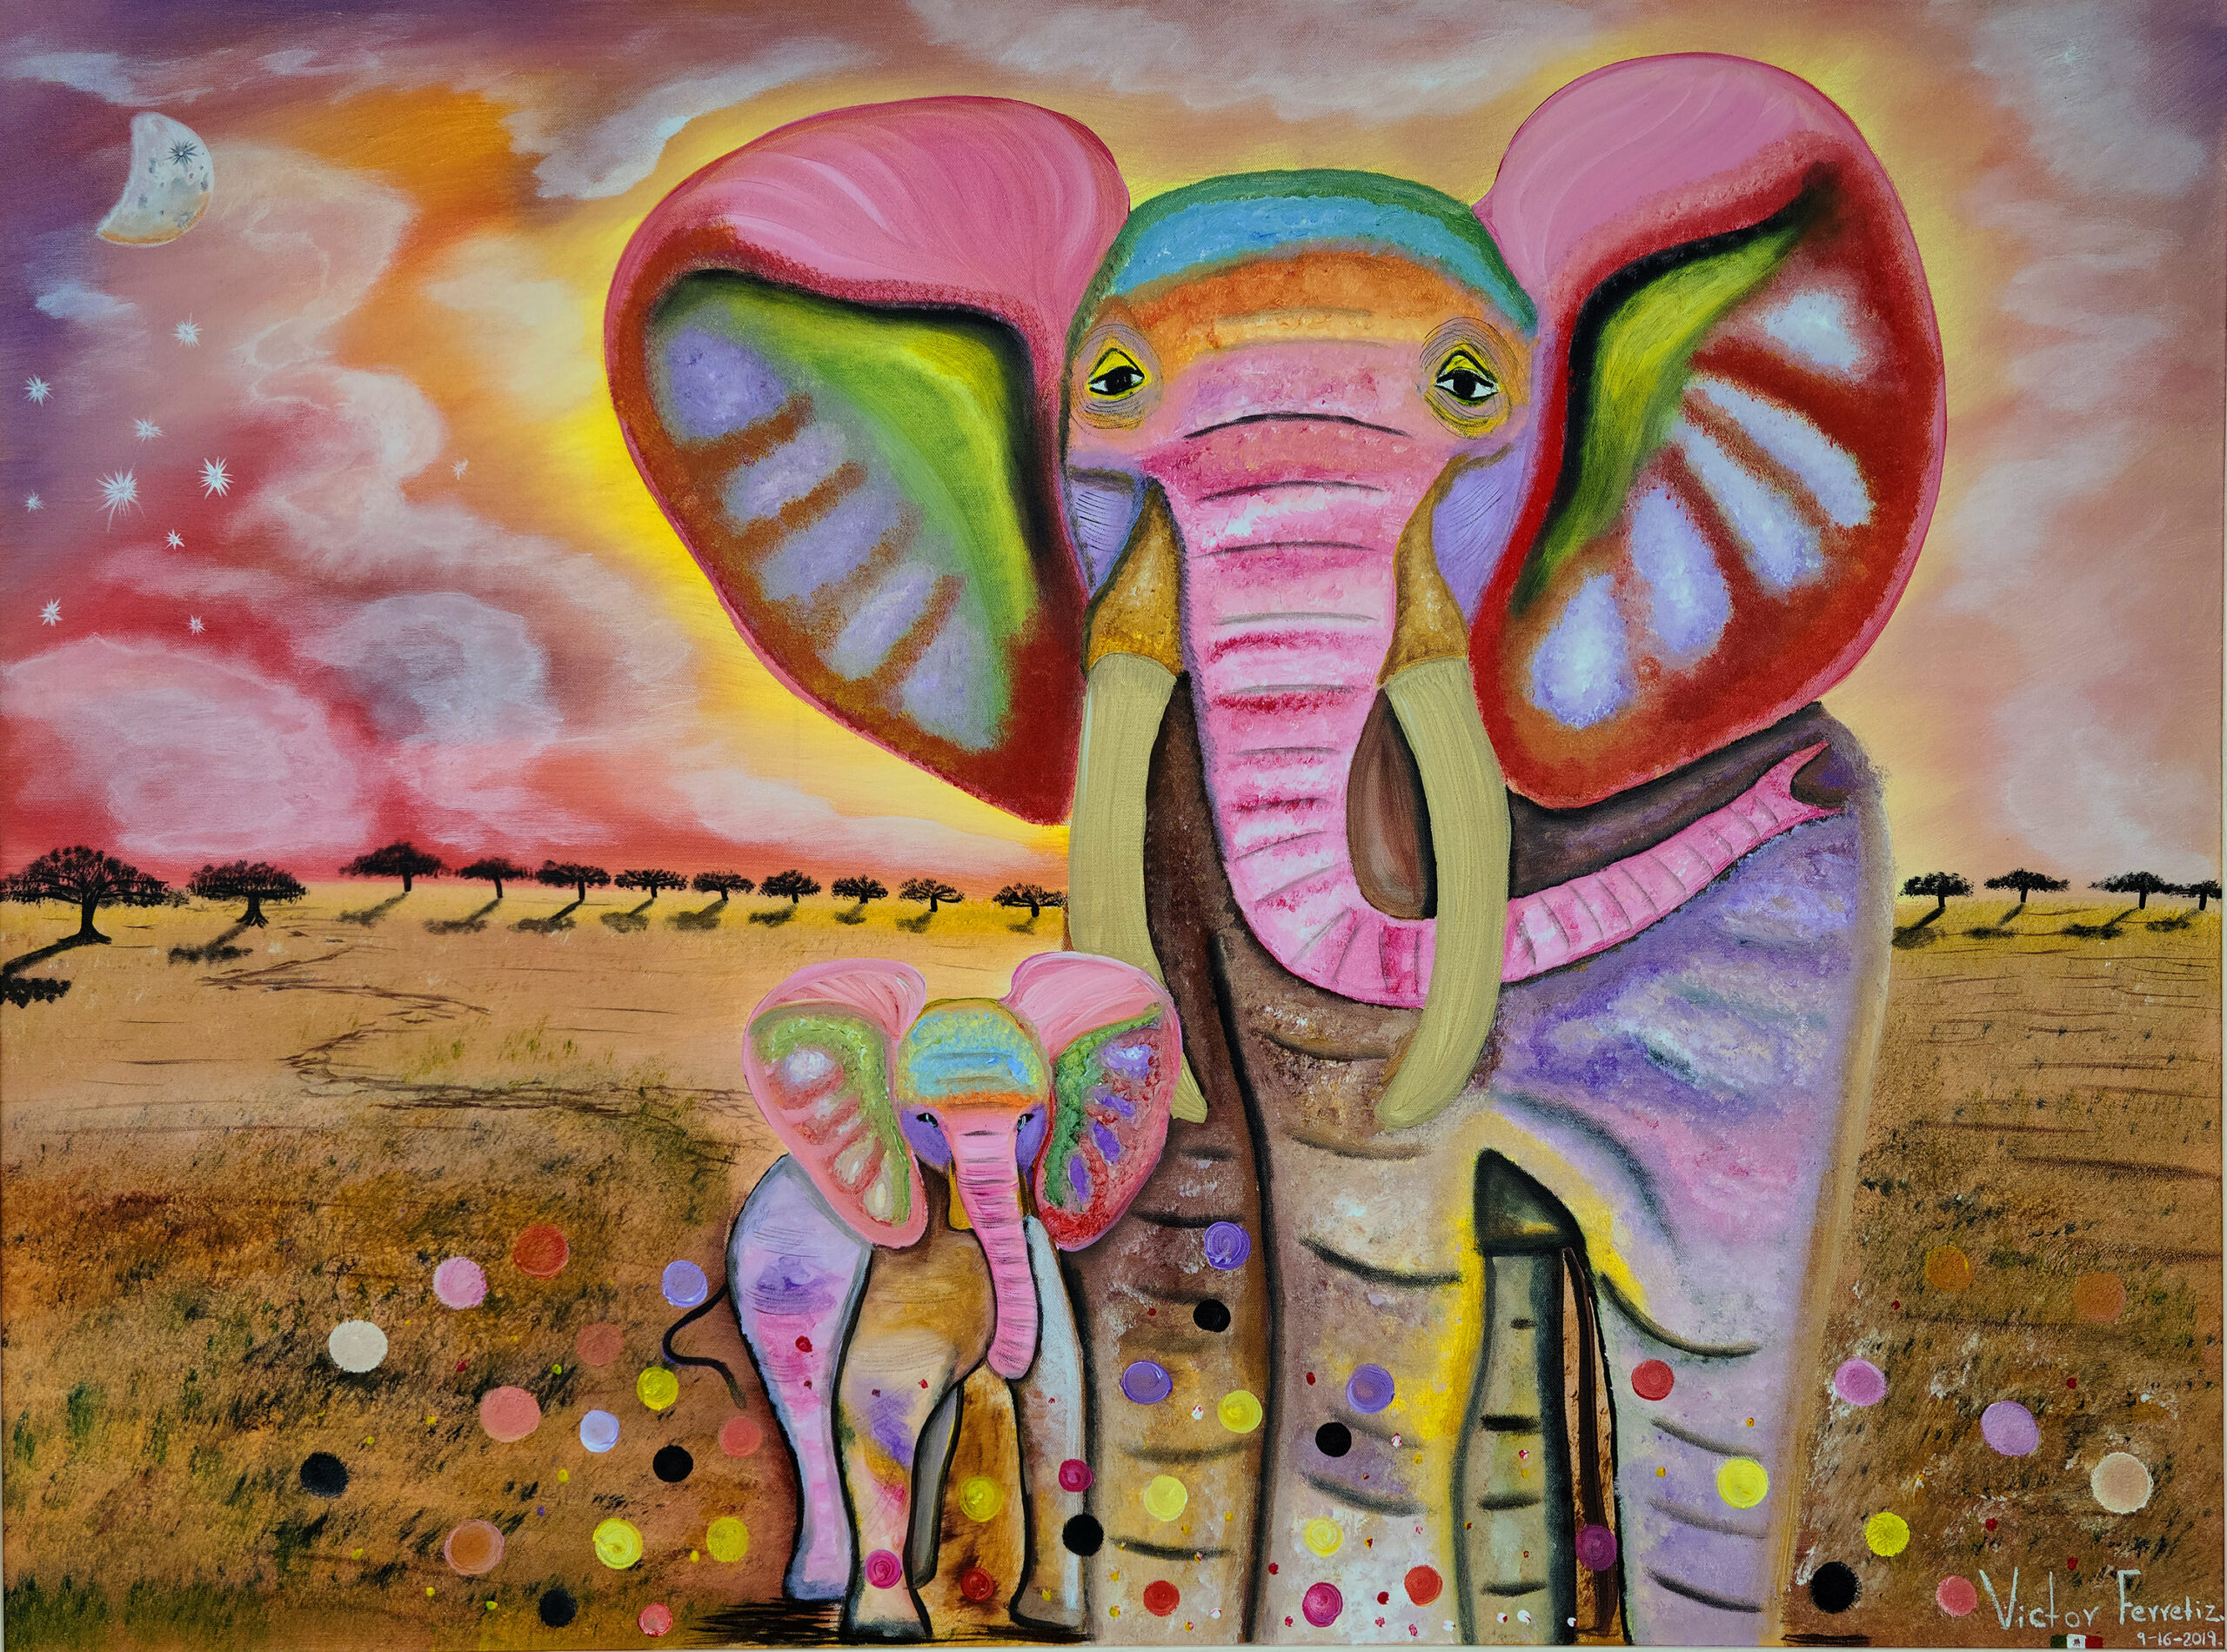 White frame included. This original work shows two elephants, the mother, and her baby elephant. She has been portrayed in a protective way where no one can try to touch her baby. The colors bring a good vibe of love, peace, and tranquility. The harmonious and cheerful colors fill a loving and magical place with charm.